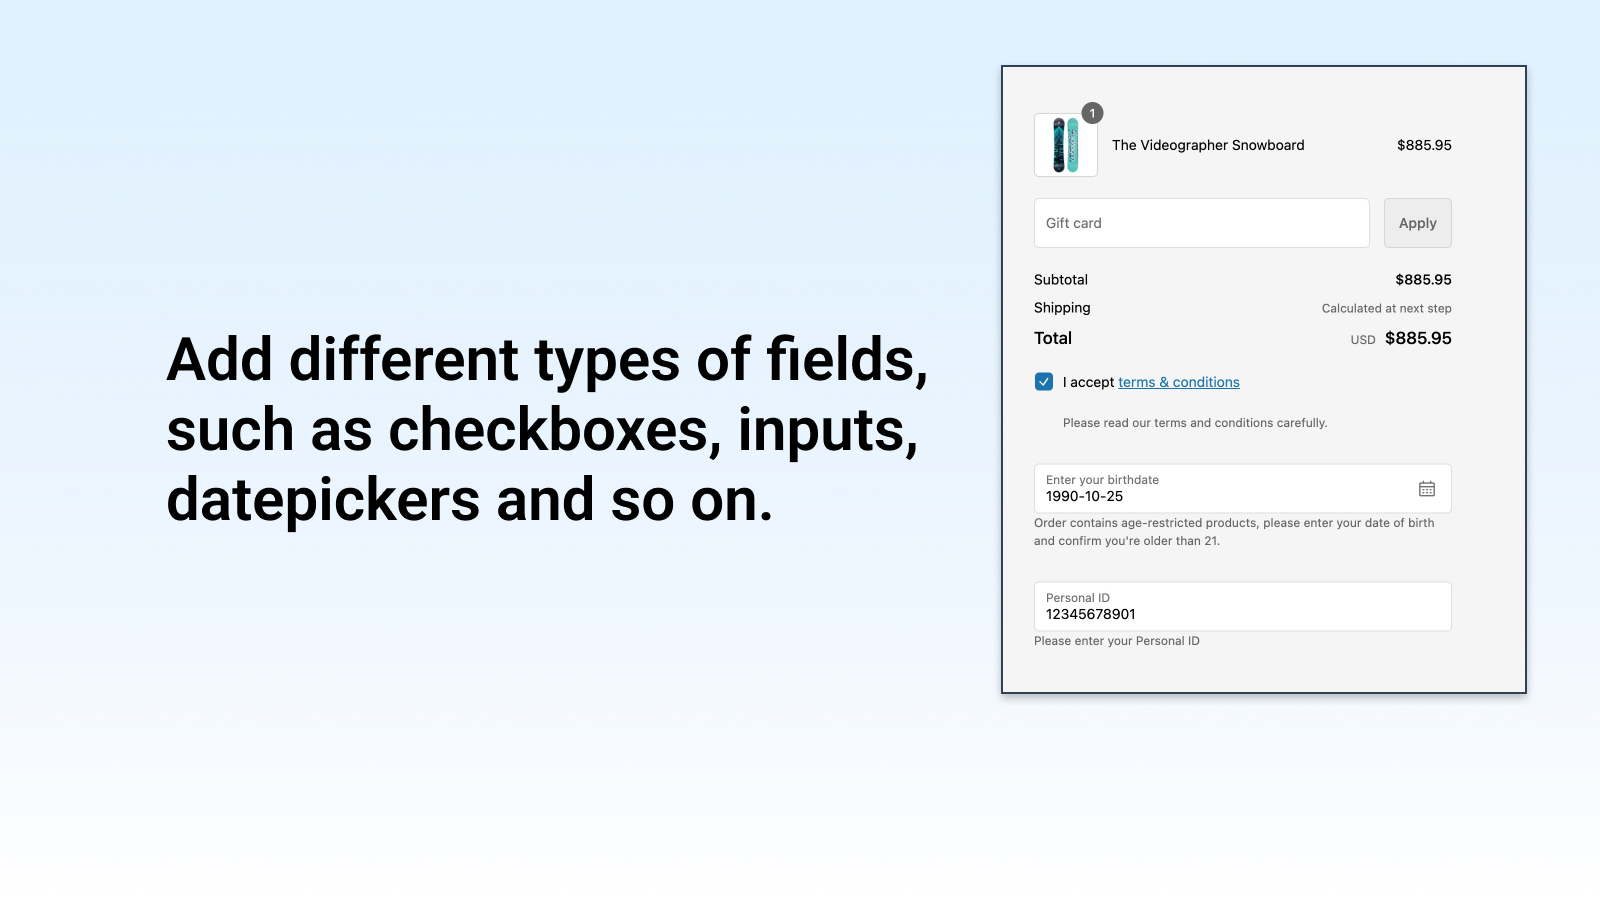 Add different types of fields, such as checkboxes, inputs, etc